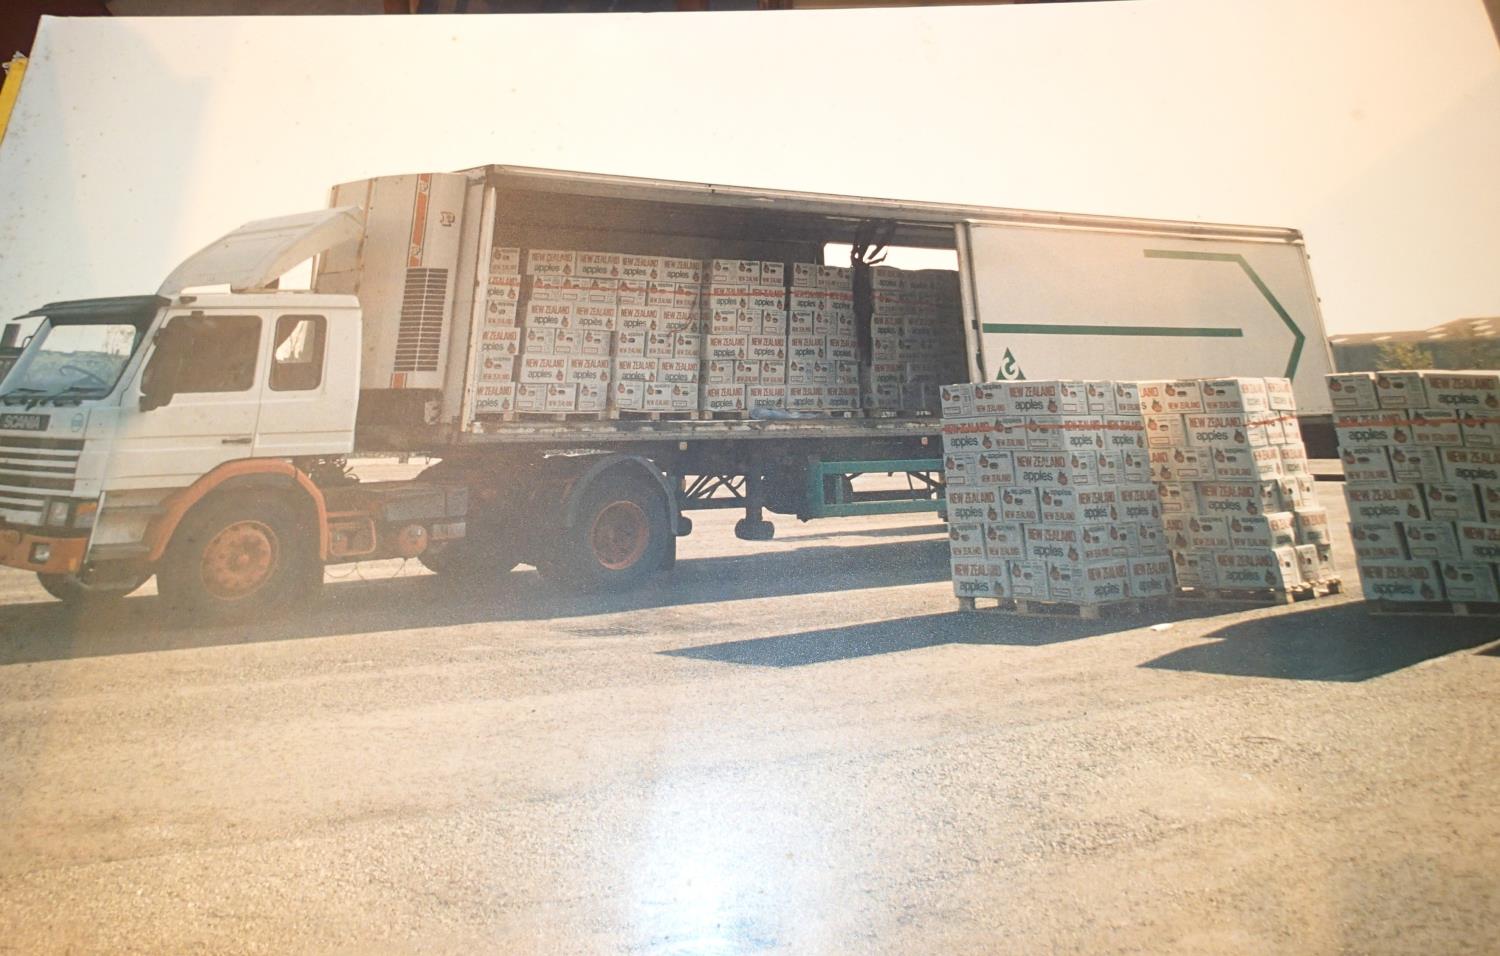 Large format photographs of trucks and interior of Fishwicks, St Helens. Not available for in-